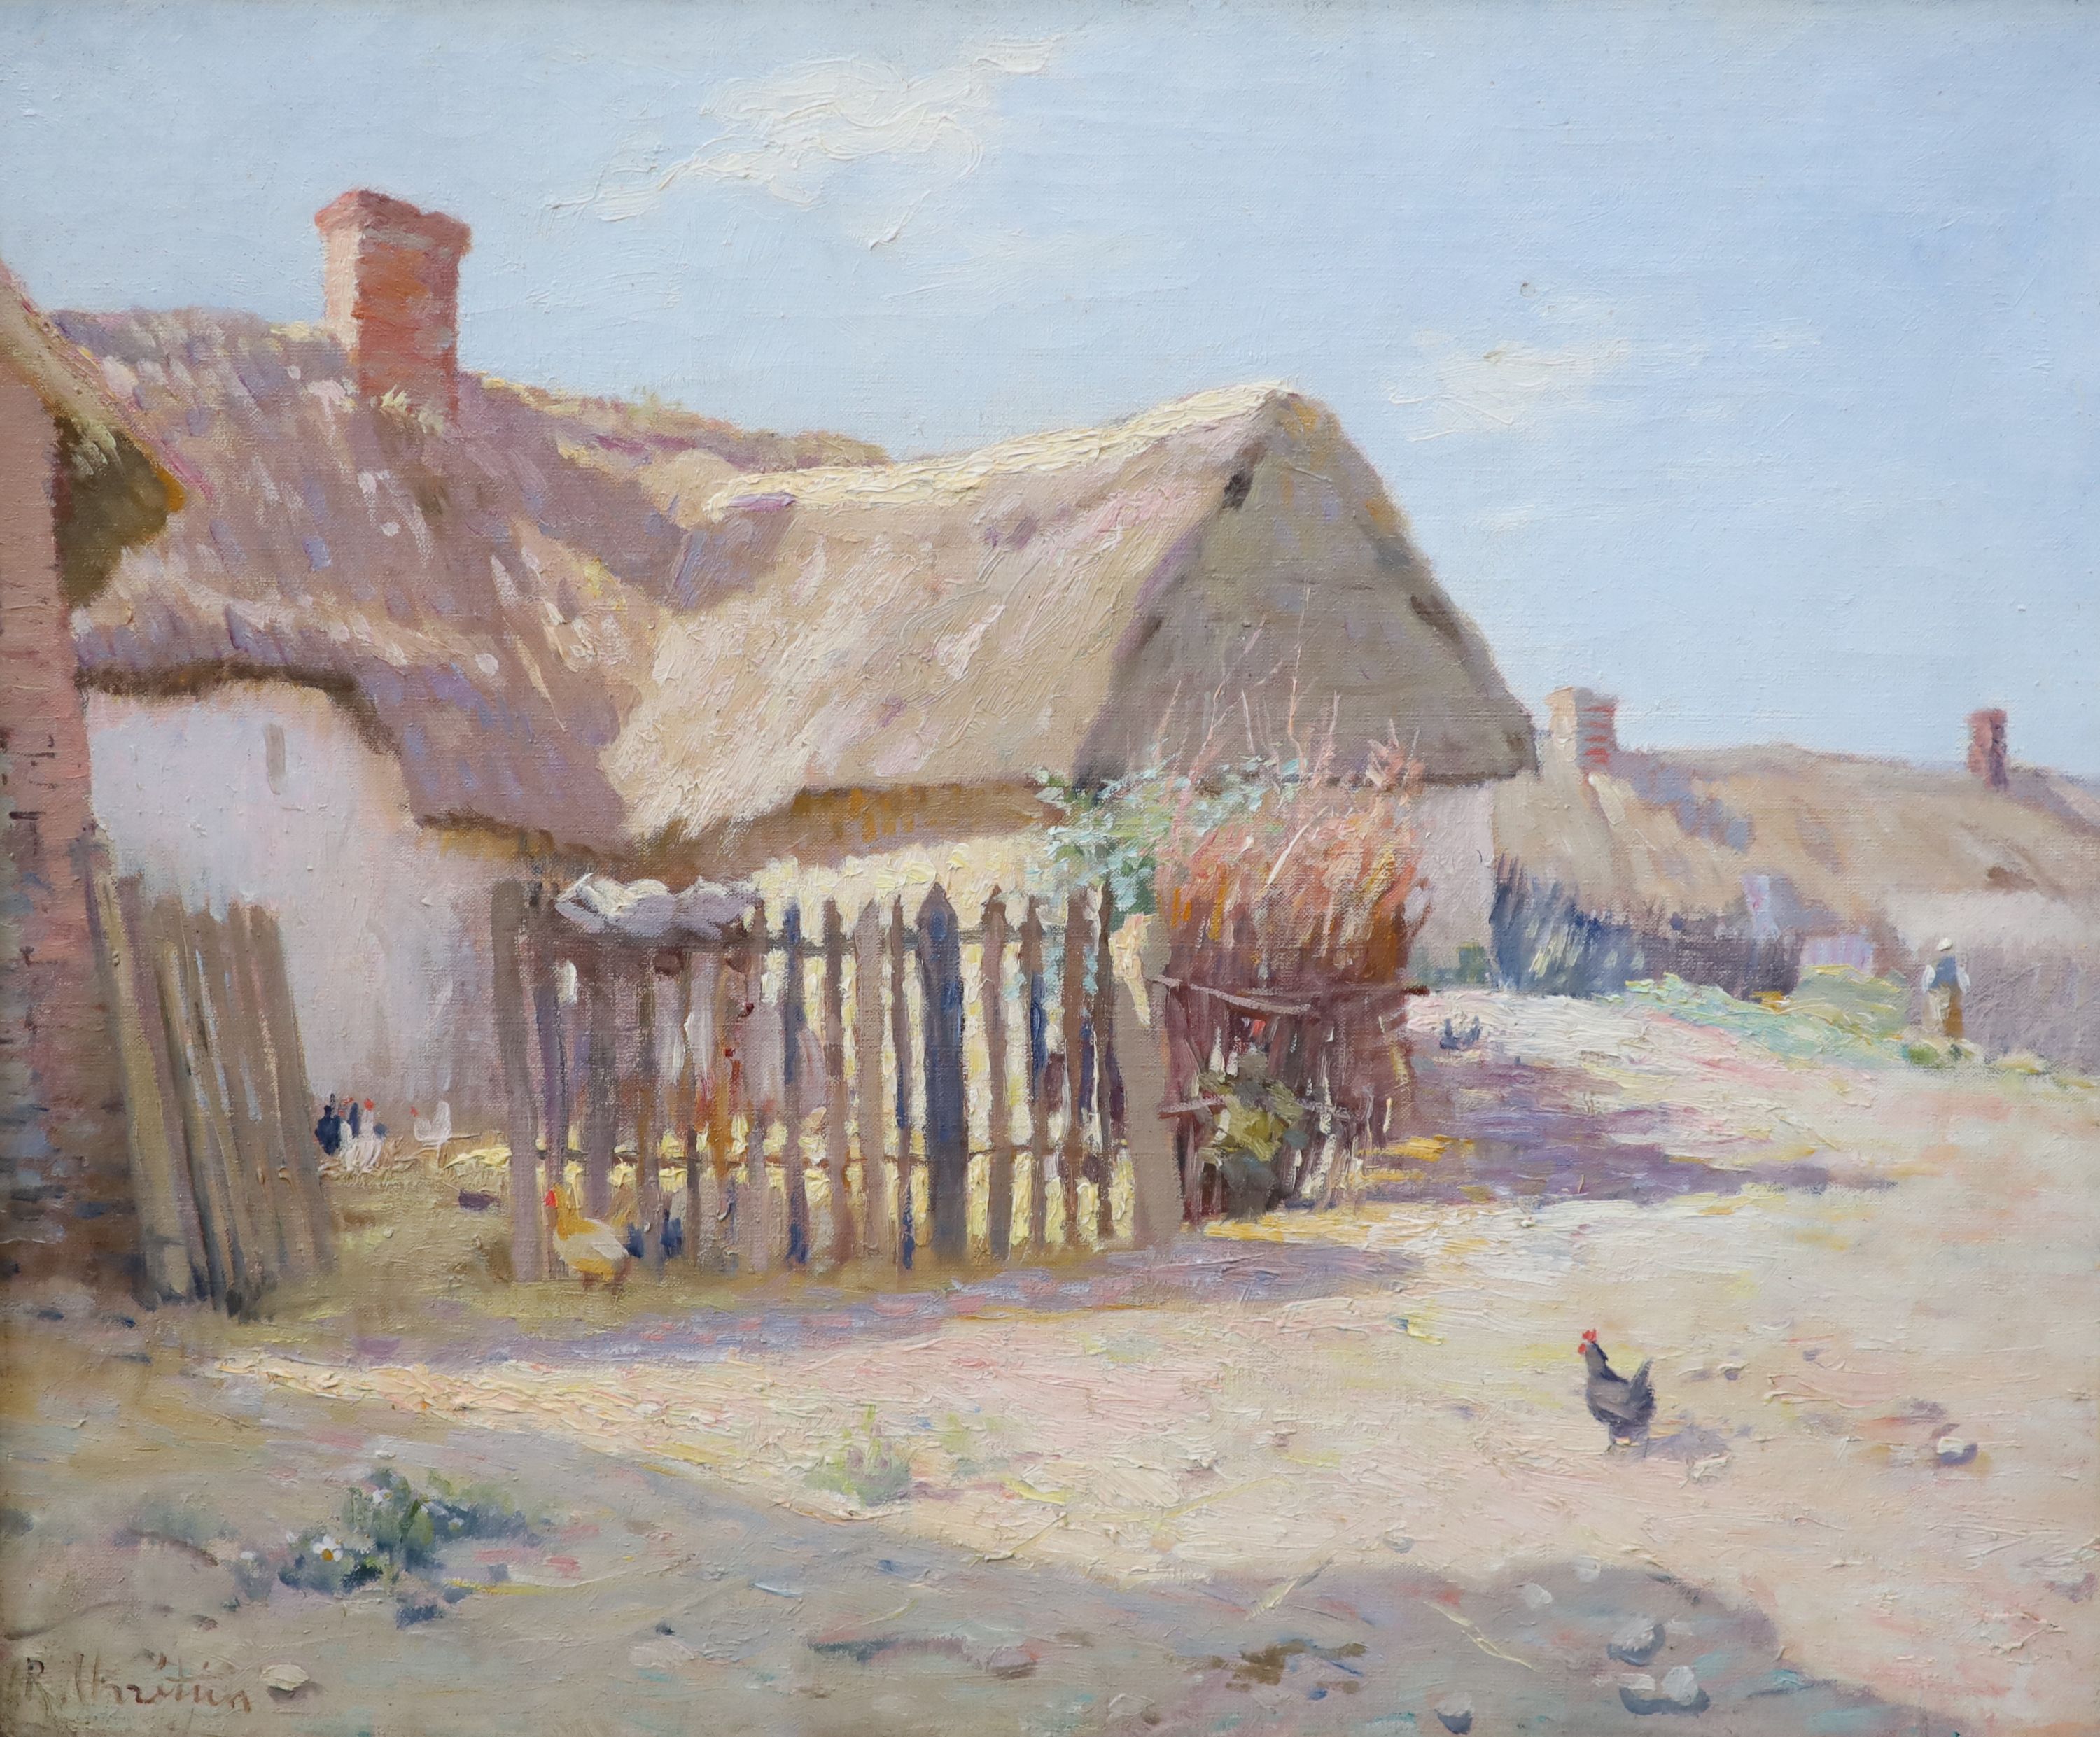 René-Louis Chrétien (French, 1867-1942), Chickens in a farmyard, Oil on canvas, 37 x 45cm.